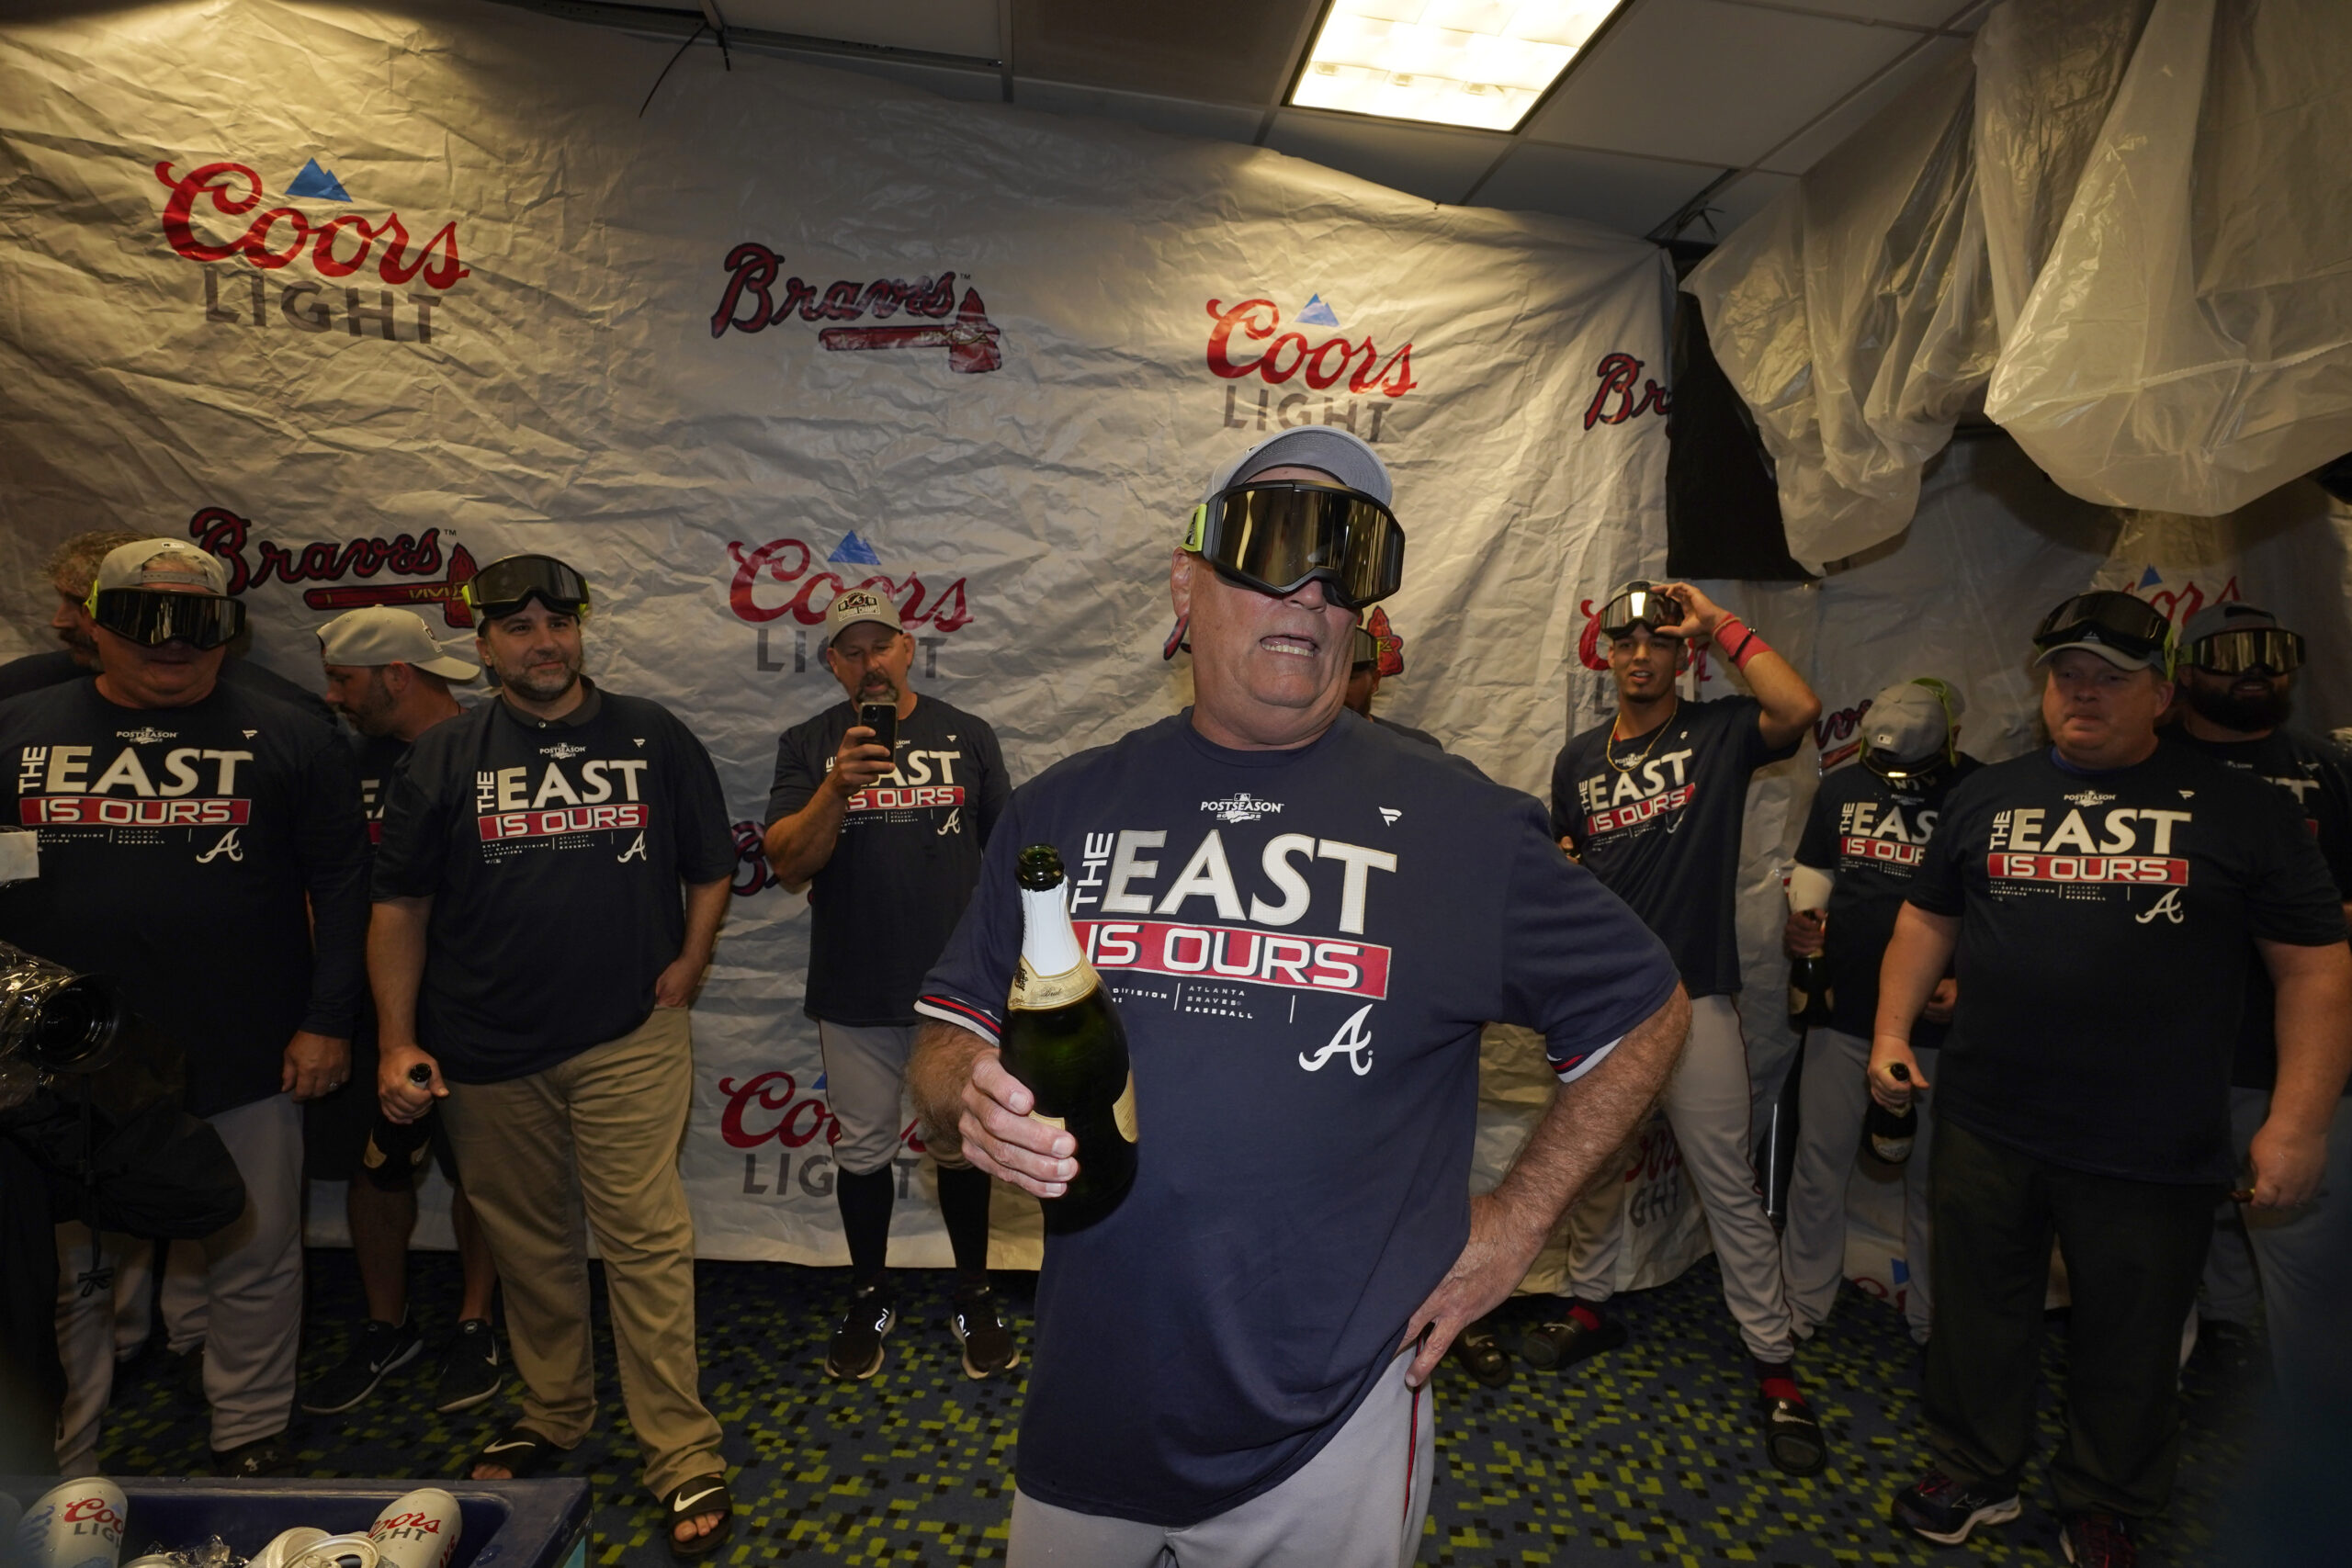 Braves clinch NL East title with 4-1 win over Phillies